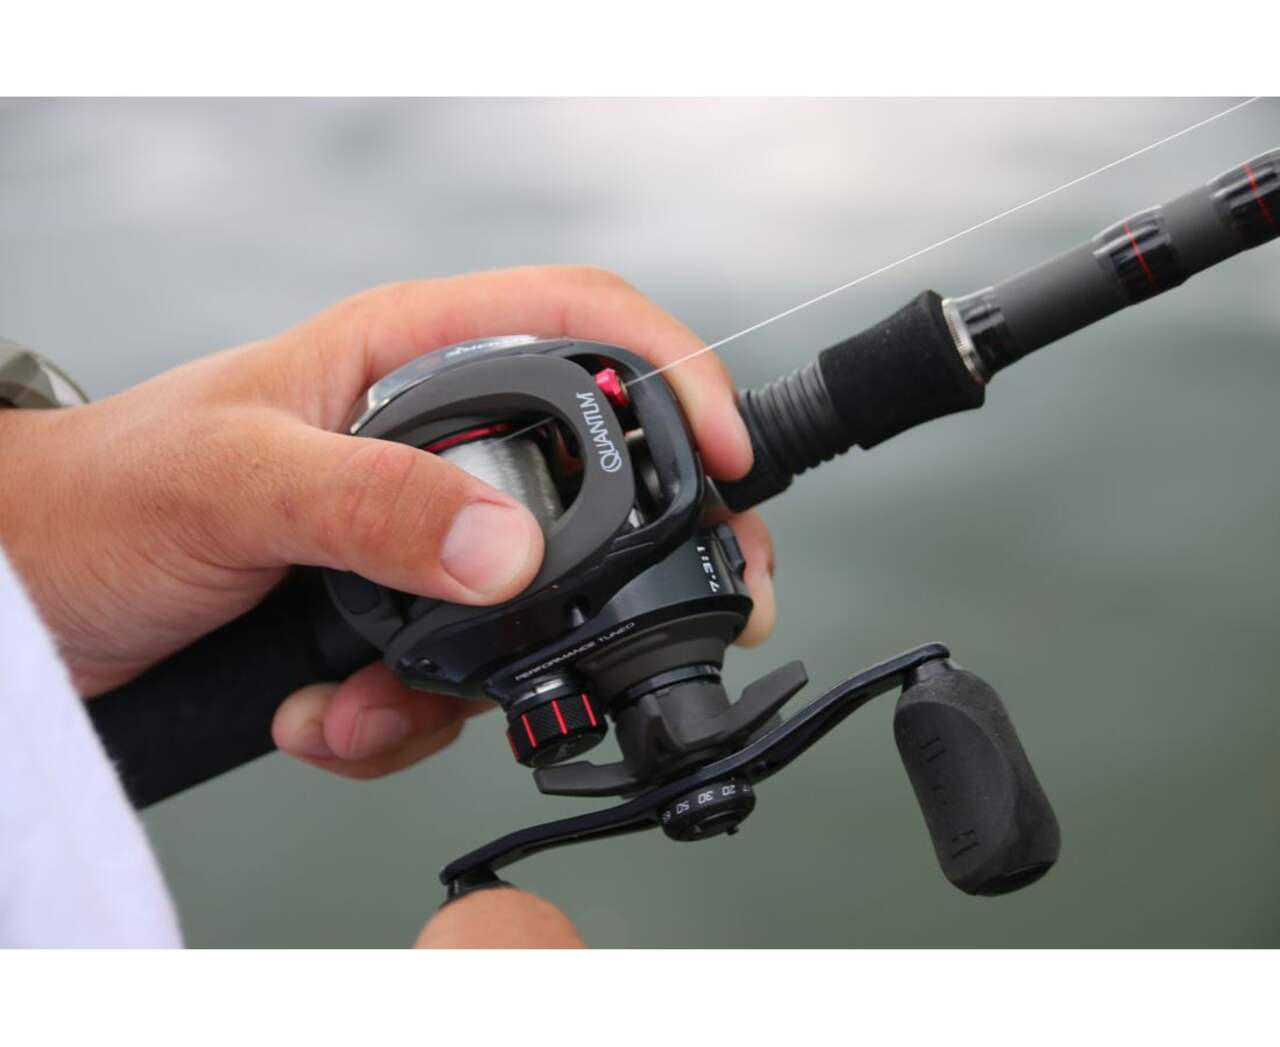 Quantum Smoke X Baitcast Fishing Reel, Size 100 Reel, Left-Hand Retrieve,  Oversized Non-Slip Handle Knobs and Continuous Anti-Reverse Clutch,One  Piece